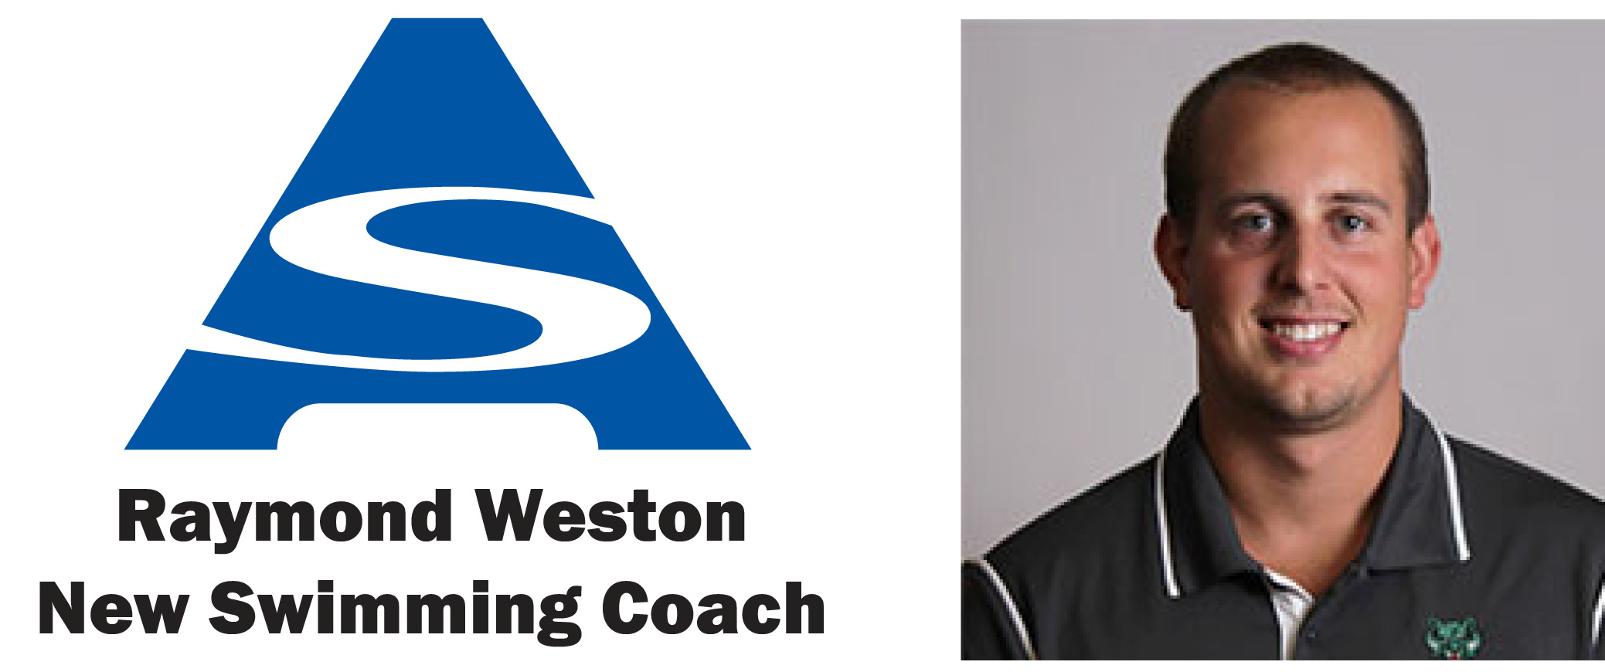 Weston Named New Swimming Coach